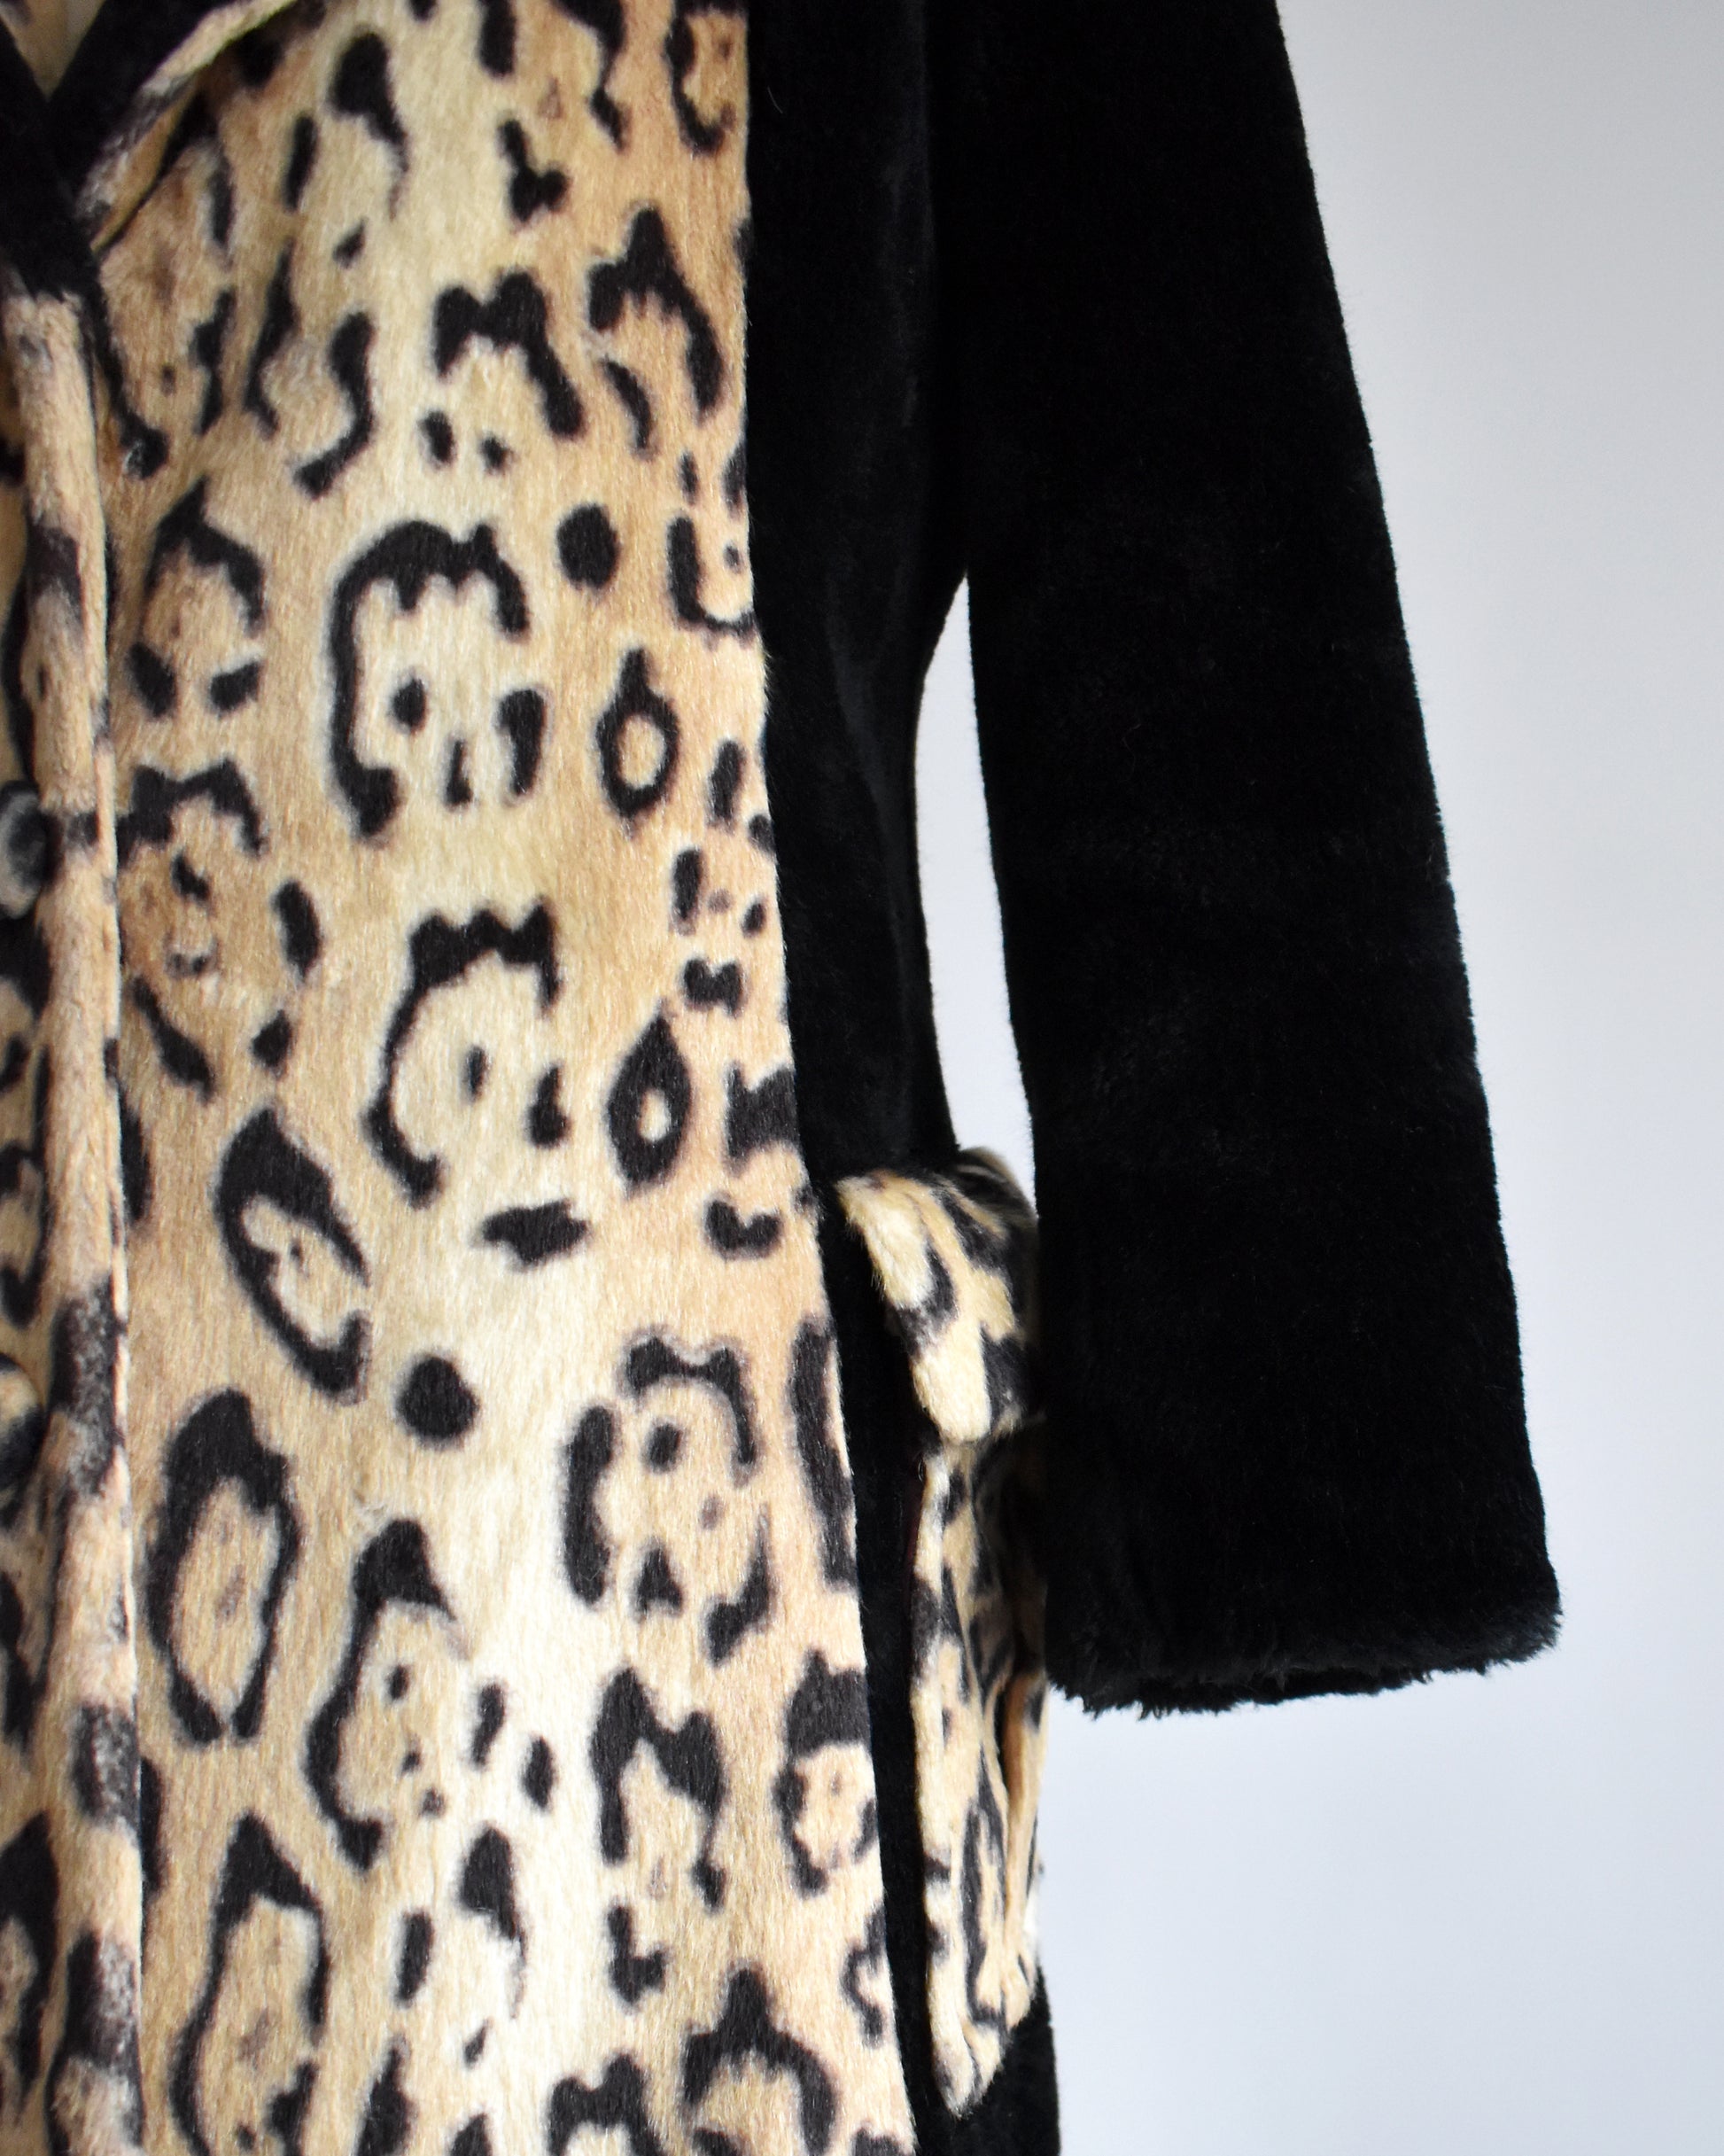 Close up of the sleeve, pocket, and leopard print front.